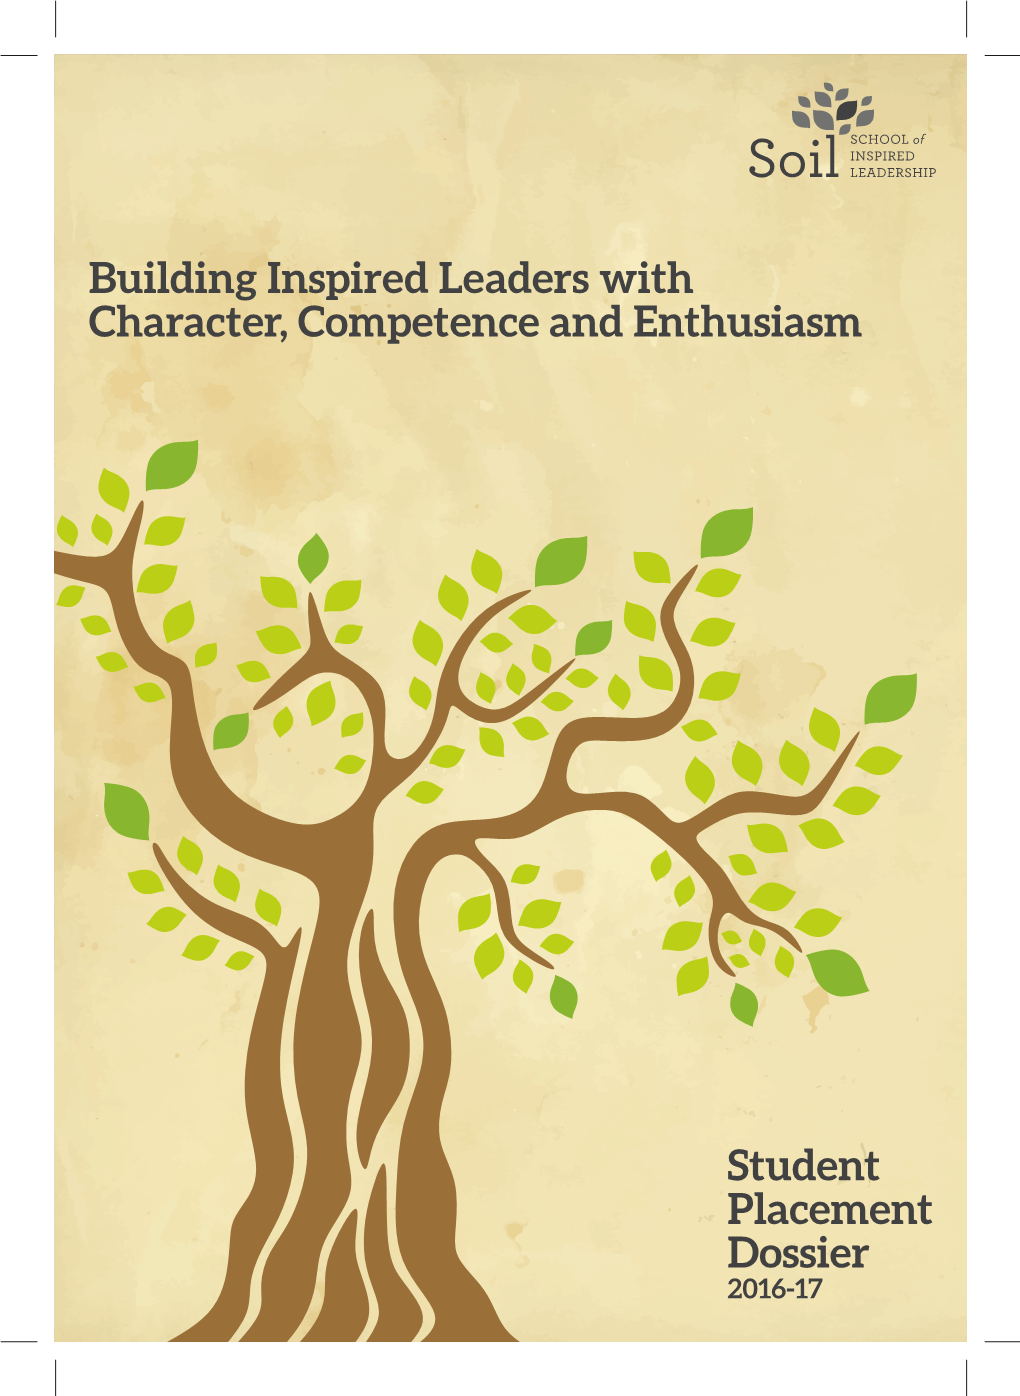 Building Inspired Leaders with Character, Competence and Enthusiasm